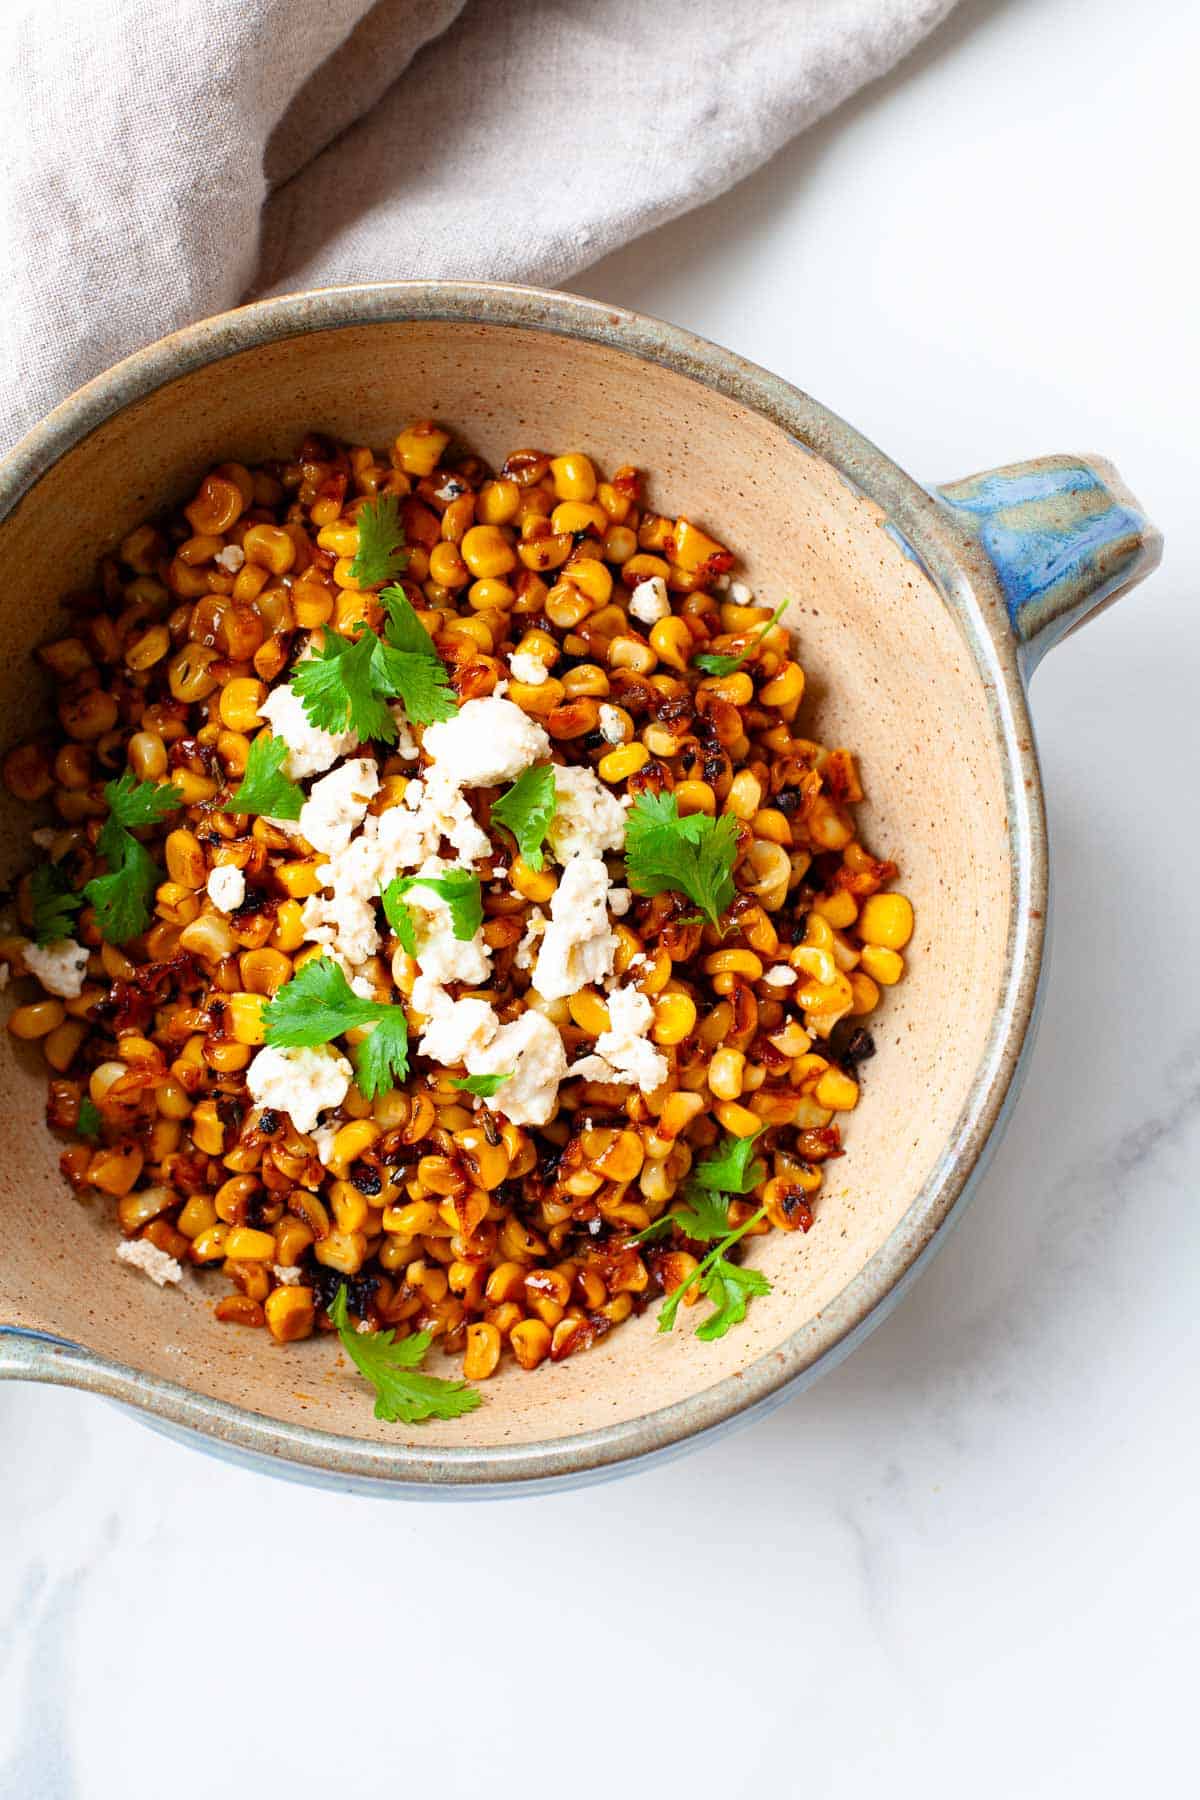 blackened corn in tan and blue bowl garnished with cilantro and crumbled feta cheese